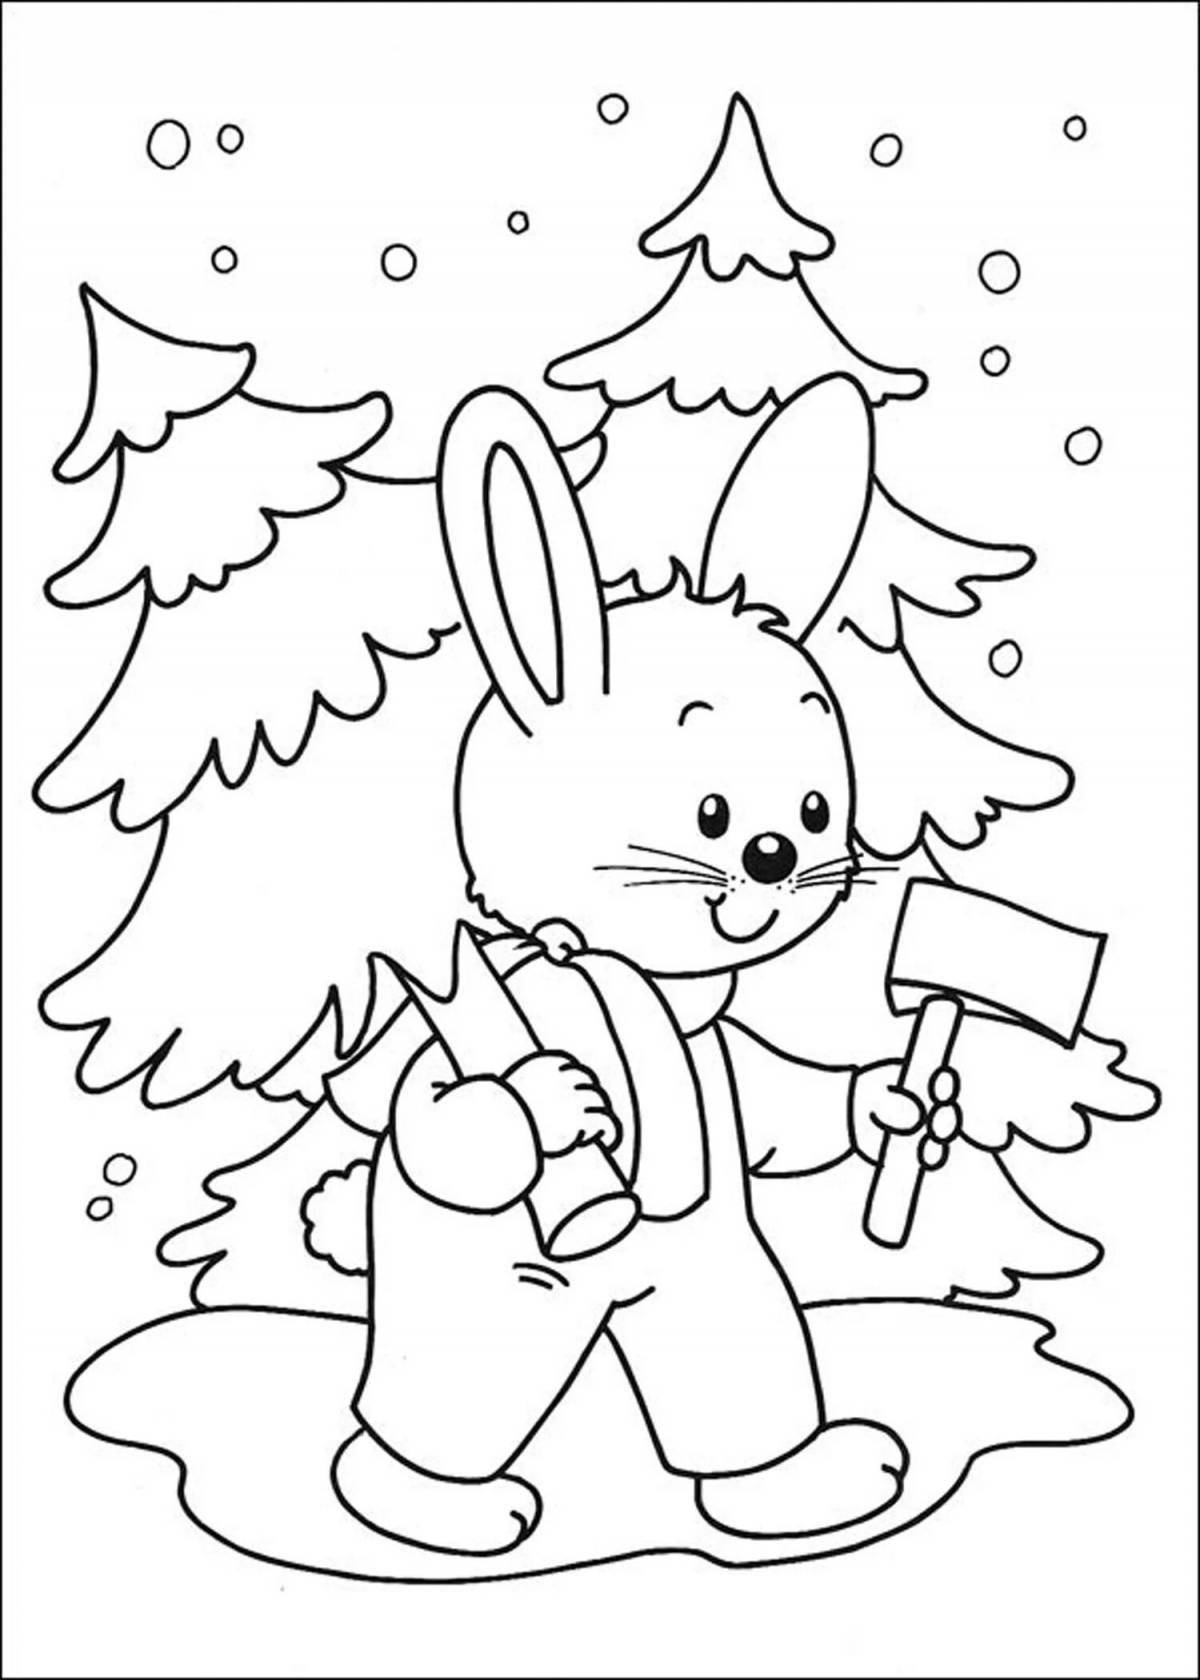 Children's bright Christmas coloring book